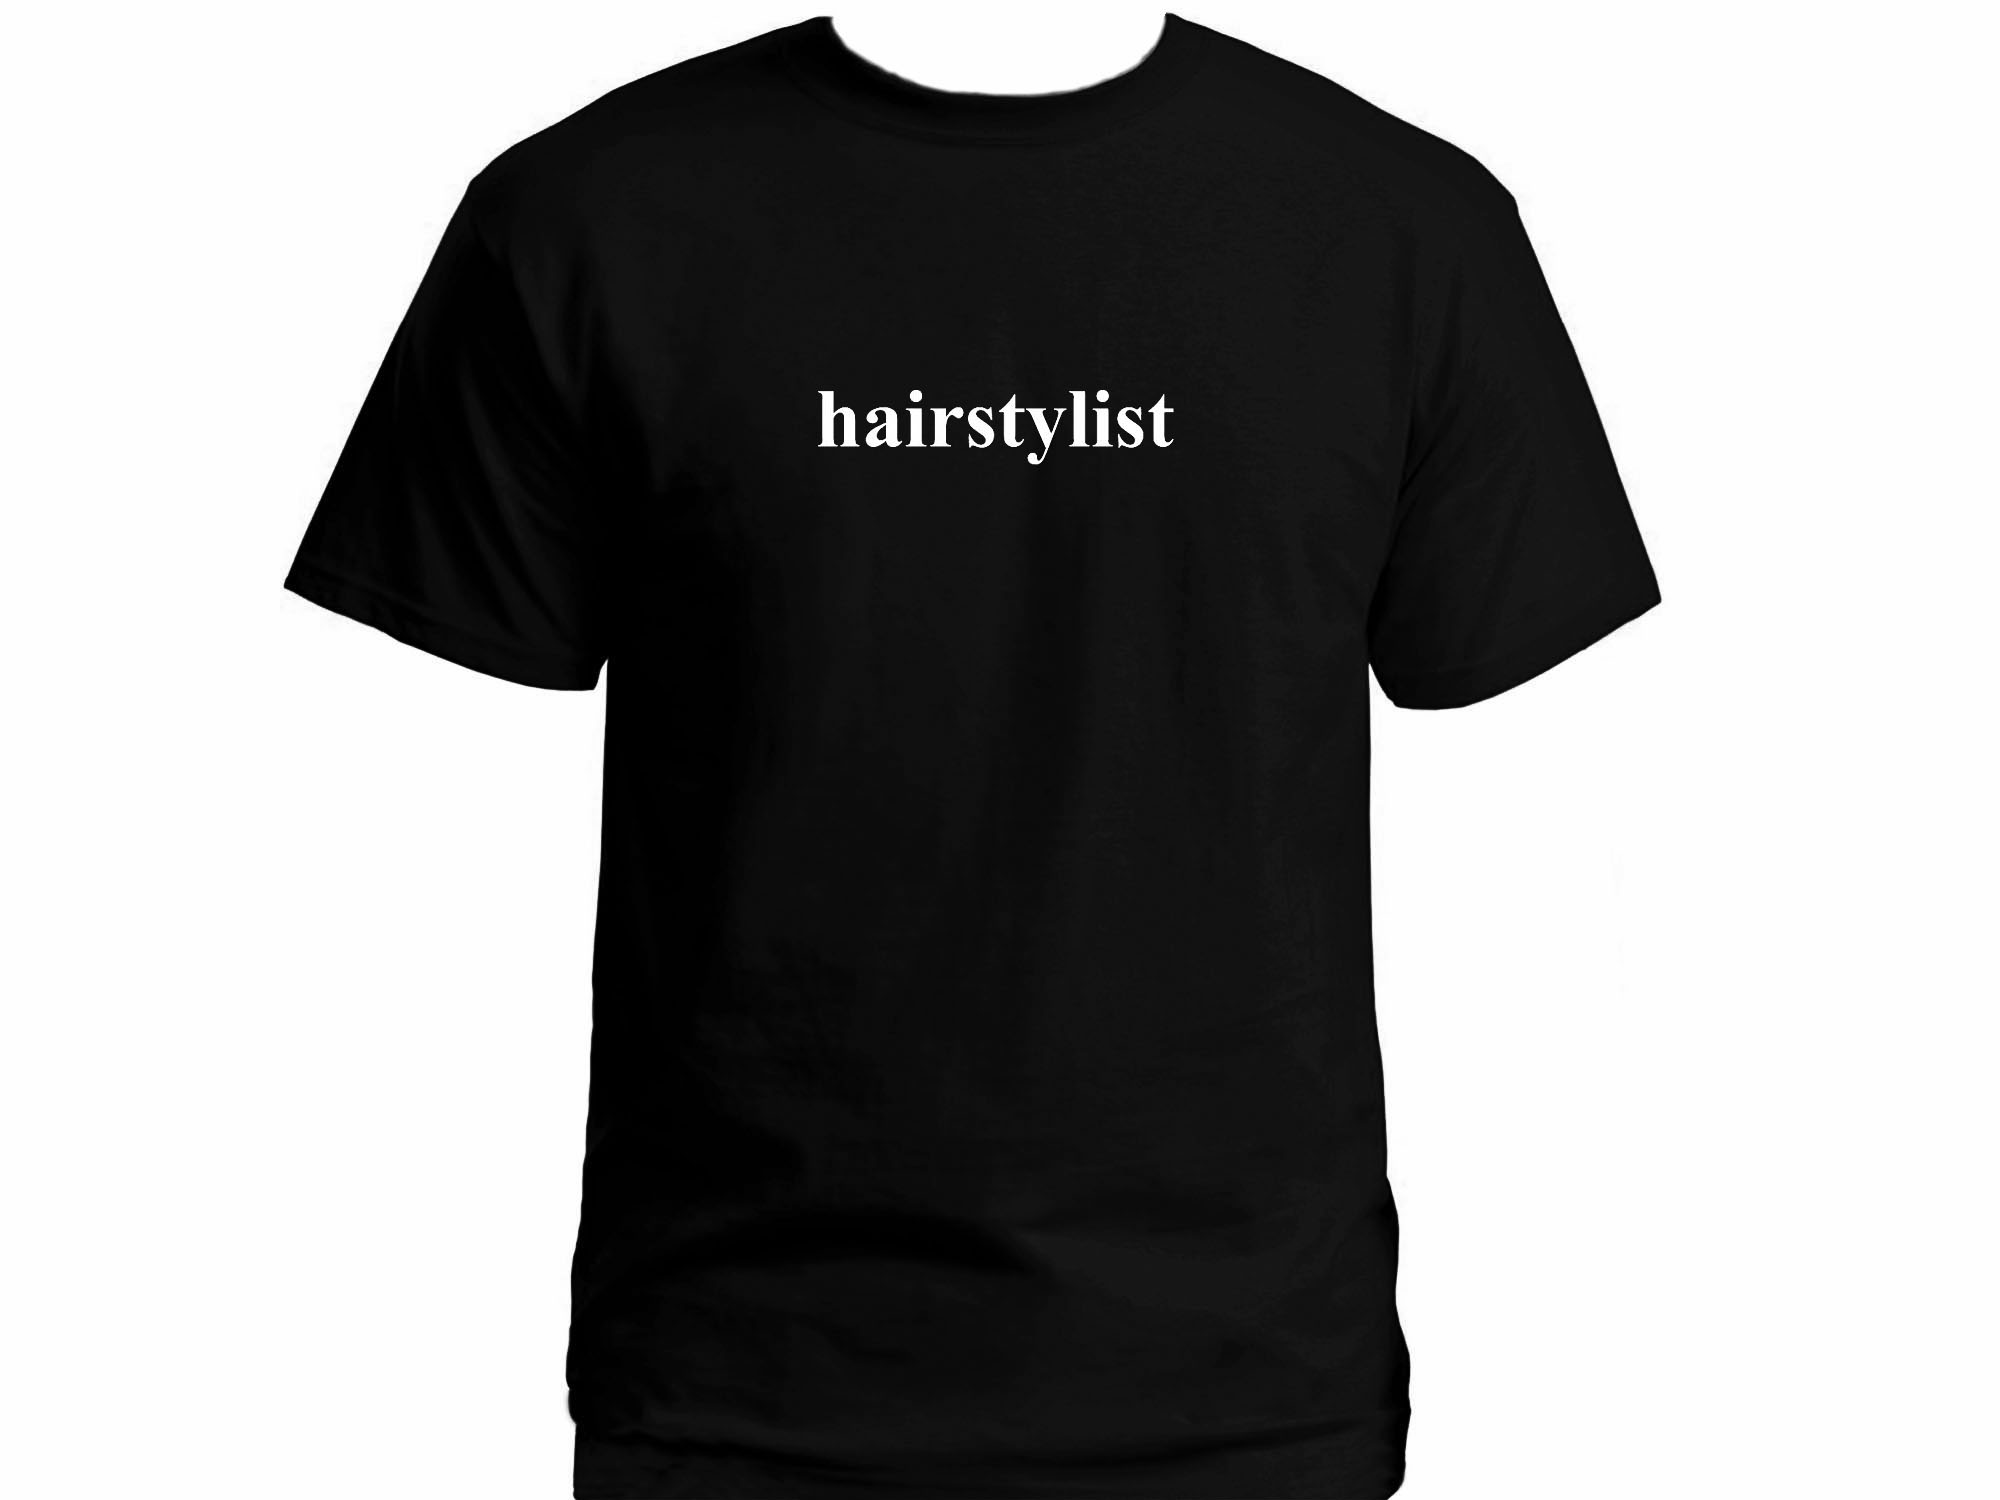 Hairstylist black color t shirt